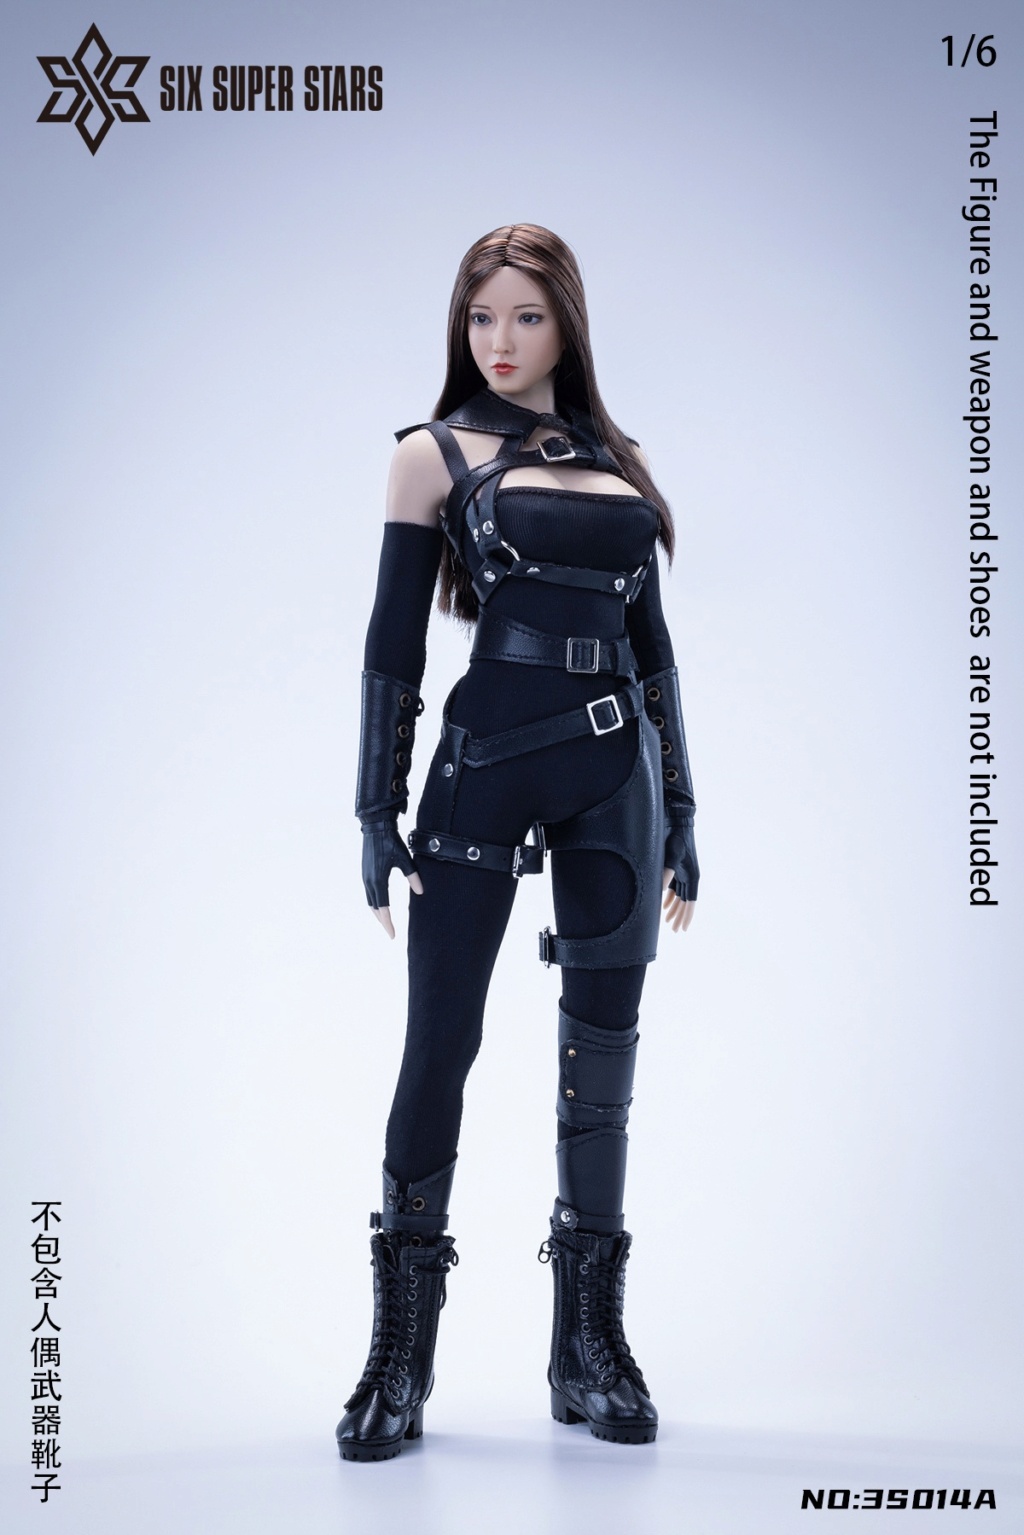 ShooterTights - NEW PRODUCT: Six Super Stars: 1/6 Shooter Tights Female Soldier Dolls Without HeadCarving Gel Body 3S014A/B 10190411